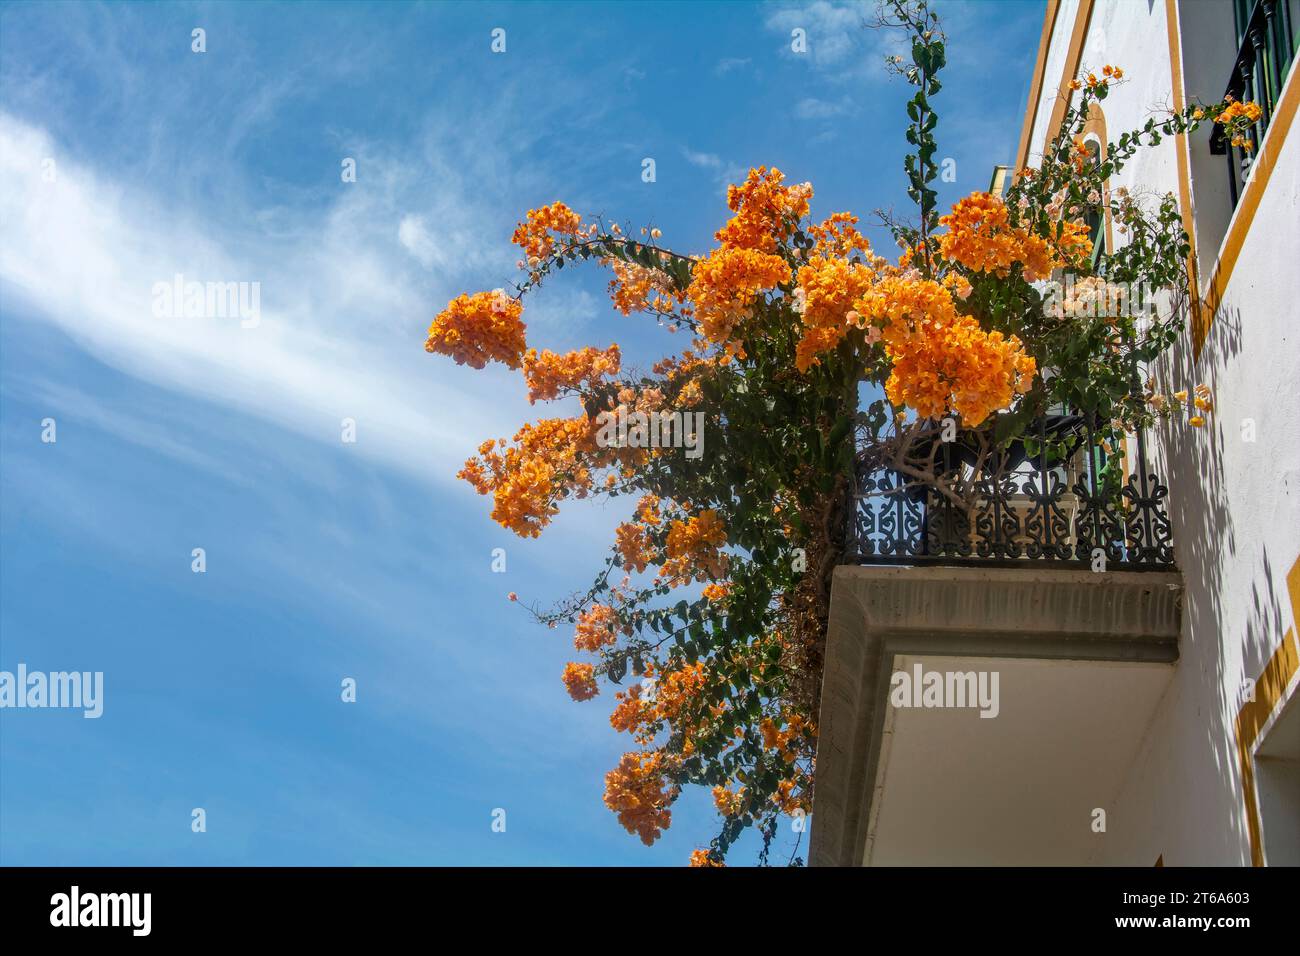 Flowers on the balcony in the romantic fishing village of Puerto de Mogán on the Canary Island of Gran Canaria in Spain Stock Photo